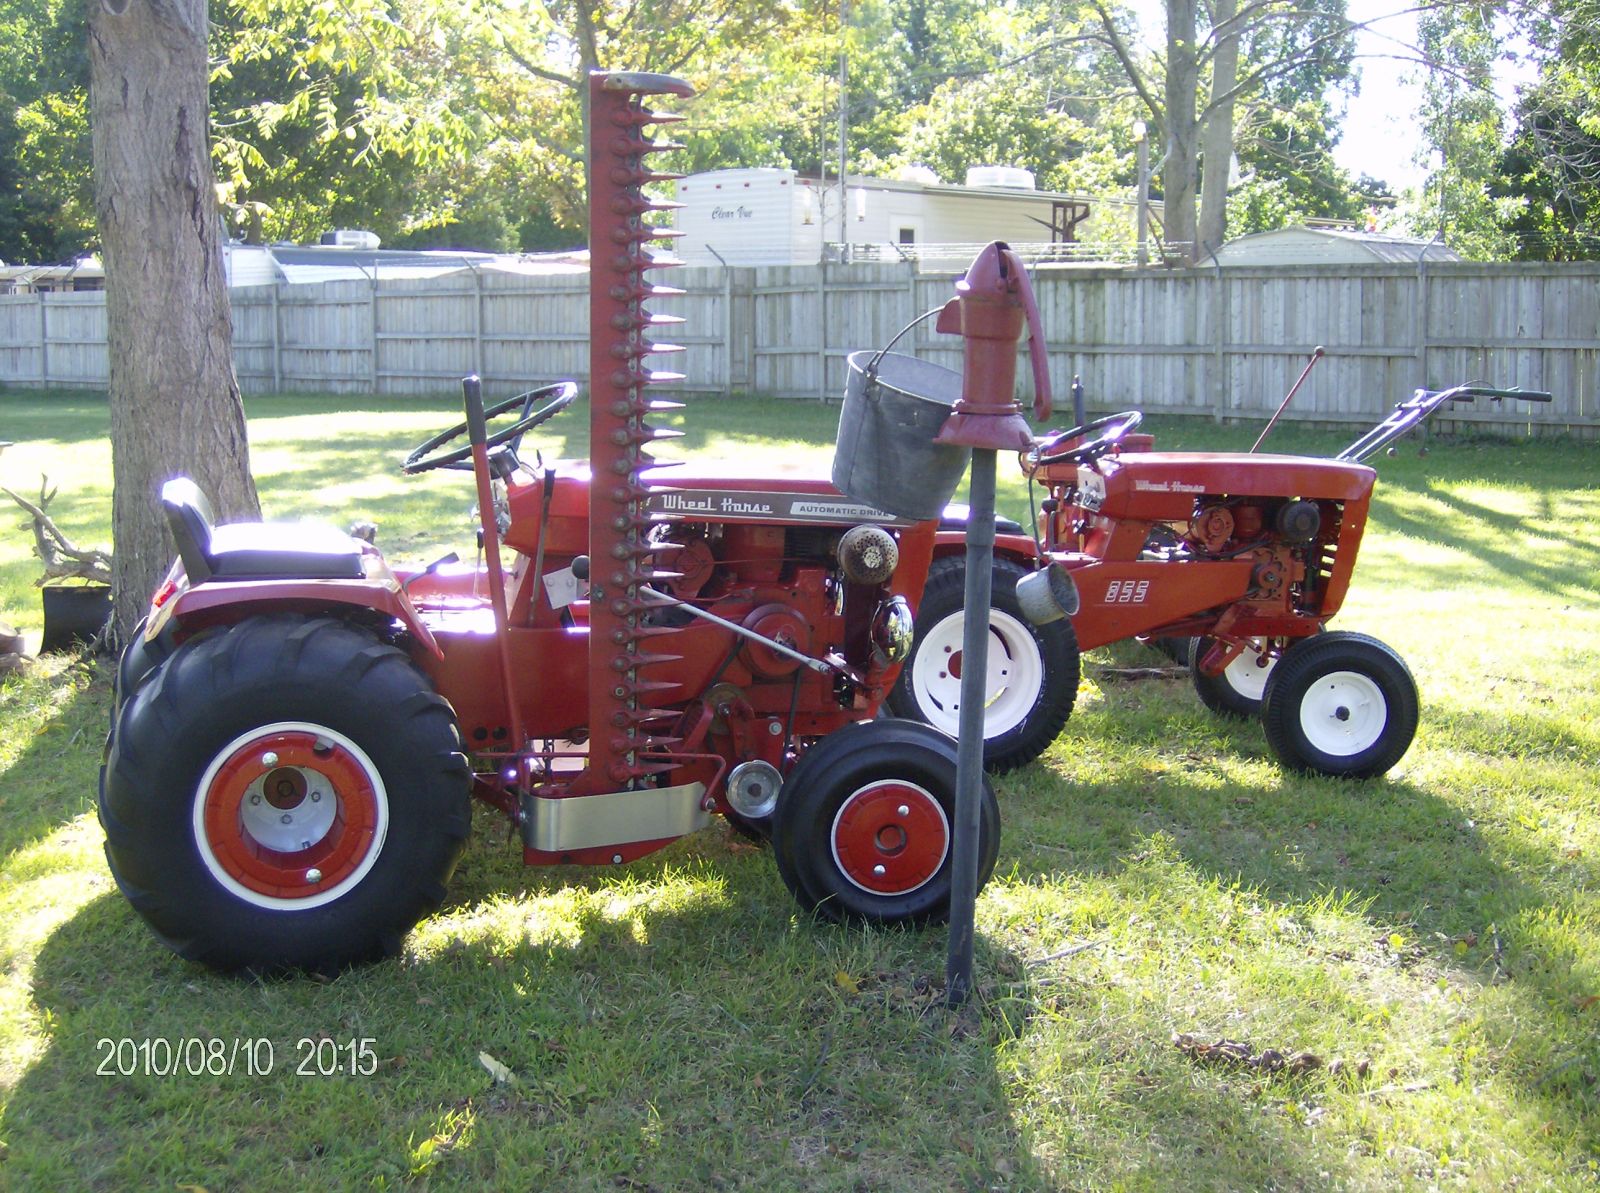 ... with the 1277 - Wheel Horse Tractors - RedSquare Wheel Horse Forum